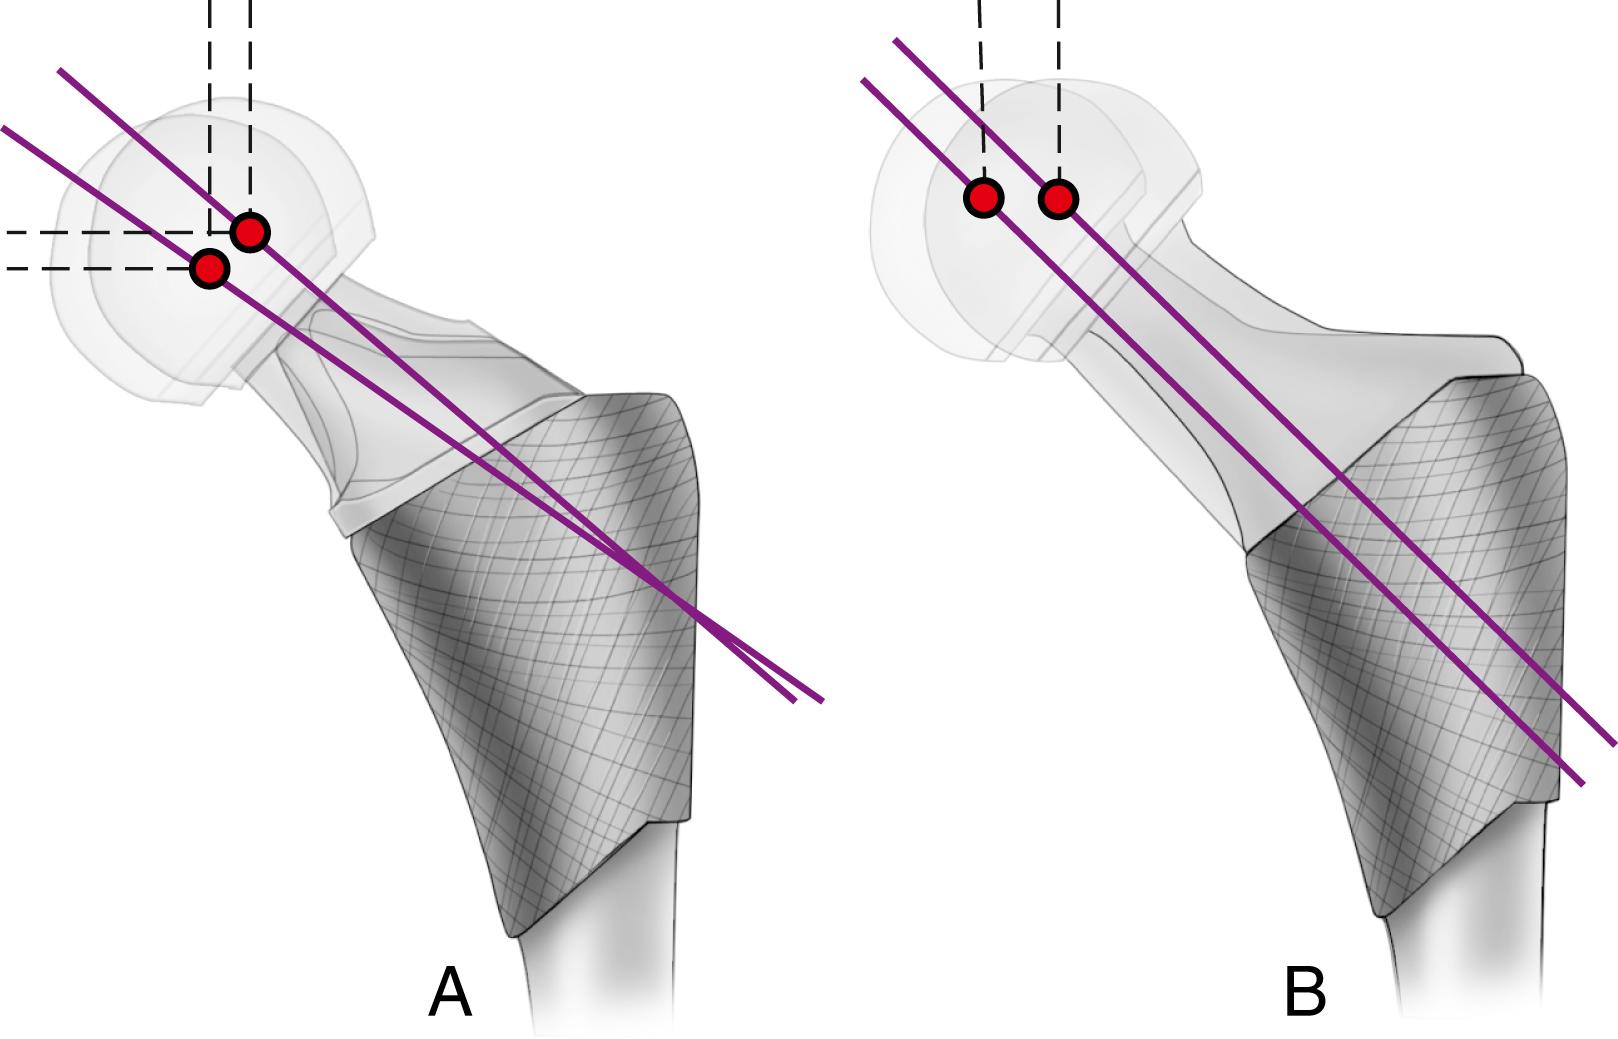 FIGURE 3.9, Variations in femoral component necks to increase offset. A, Neck-stem angle is reduced. B, Neck is attached at more medial position on stem. SEE TECHNIQUE 3.5.